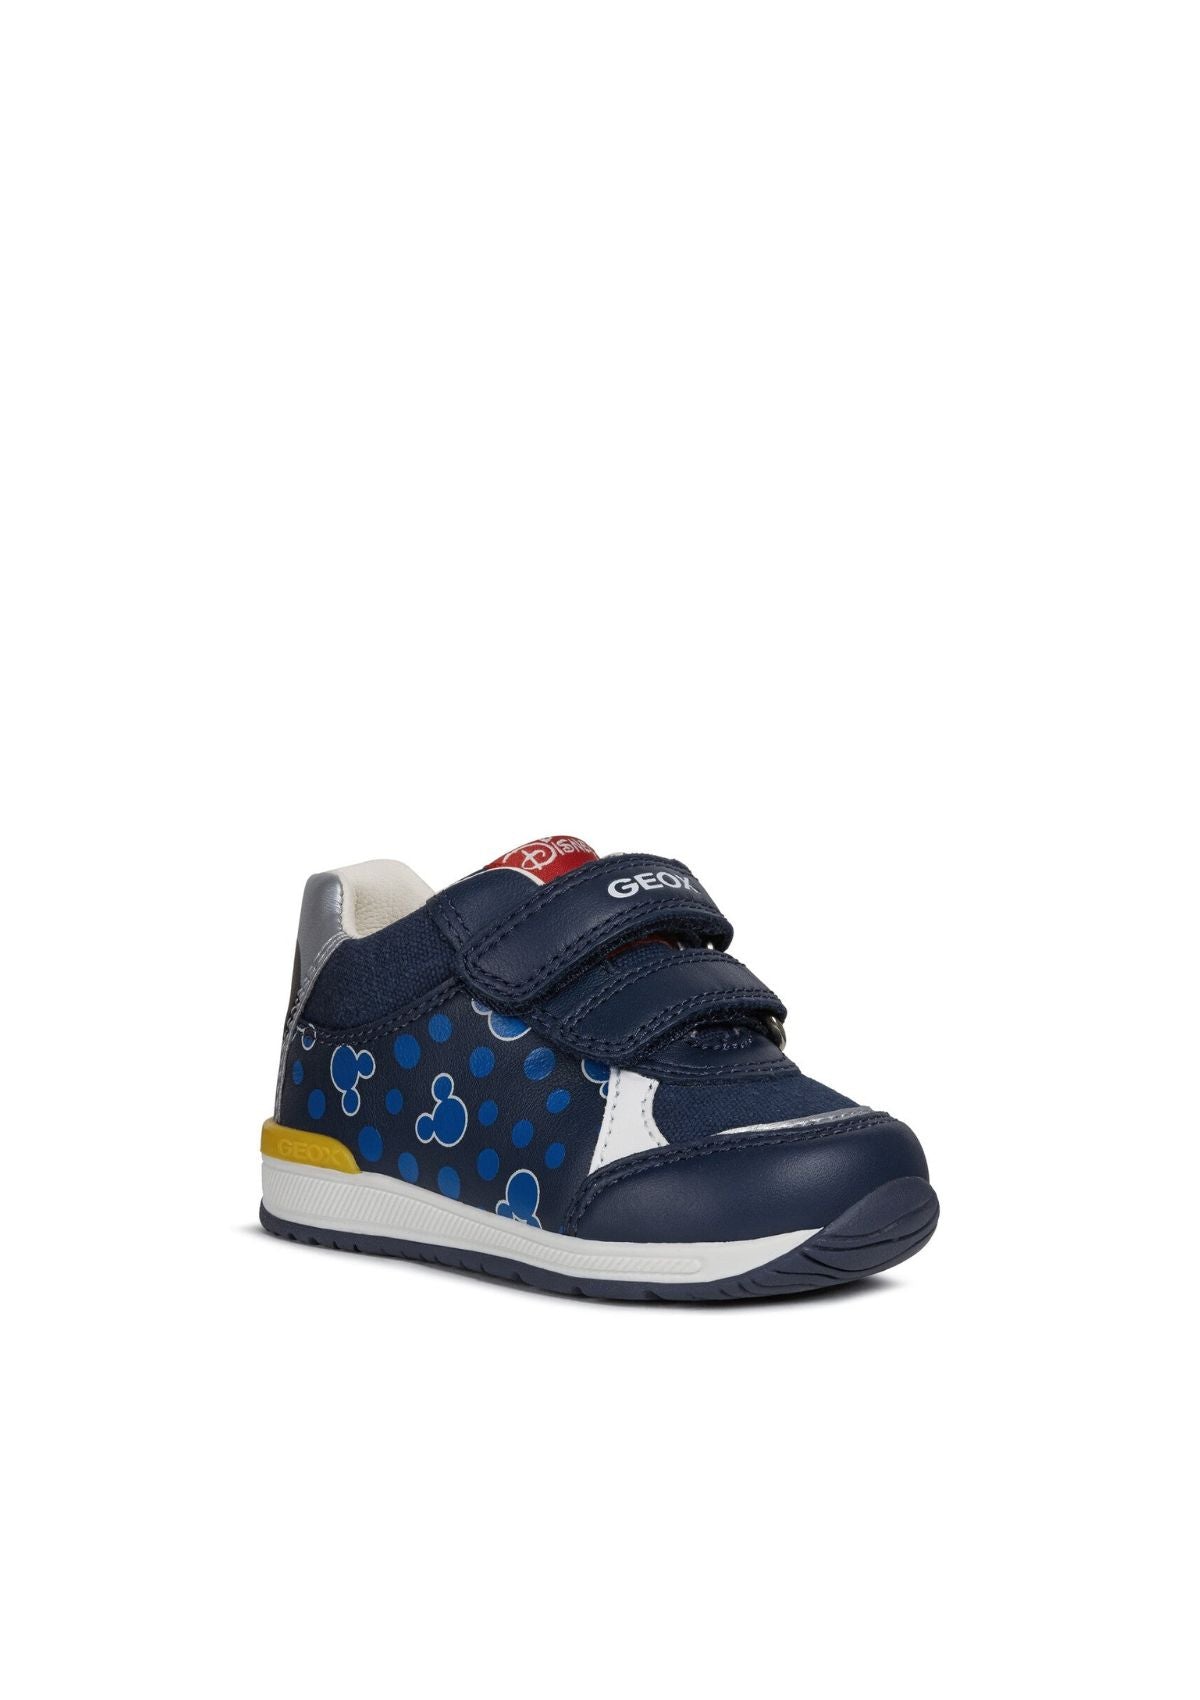 Geox Baby Boys RISHON Navy Silver Side Front